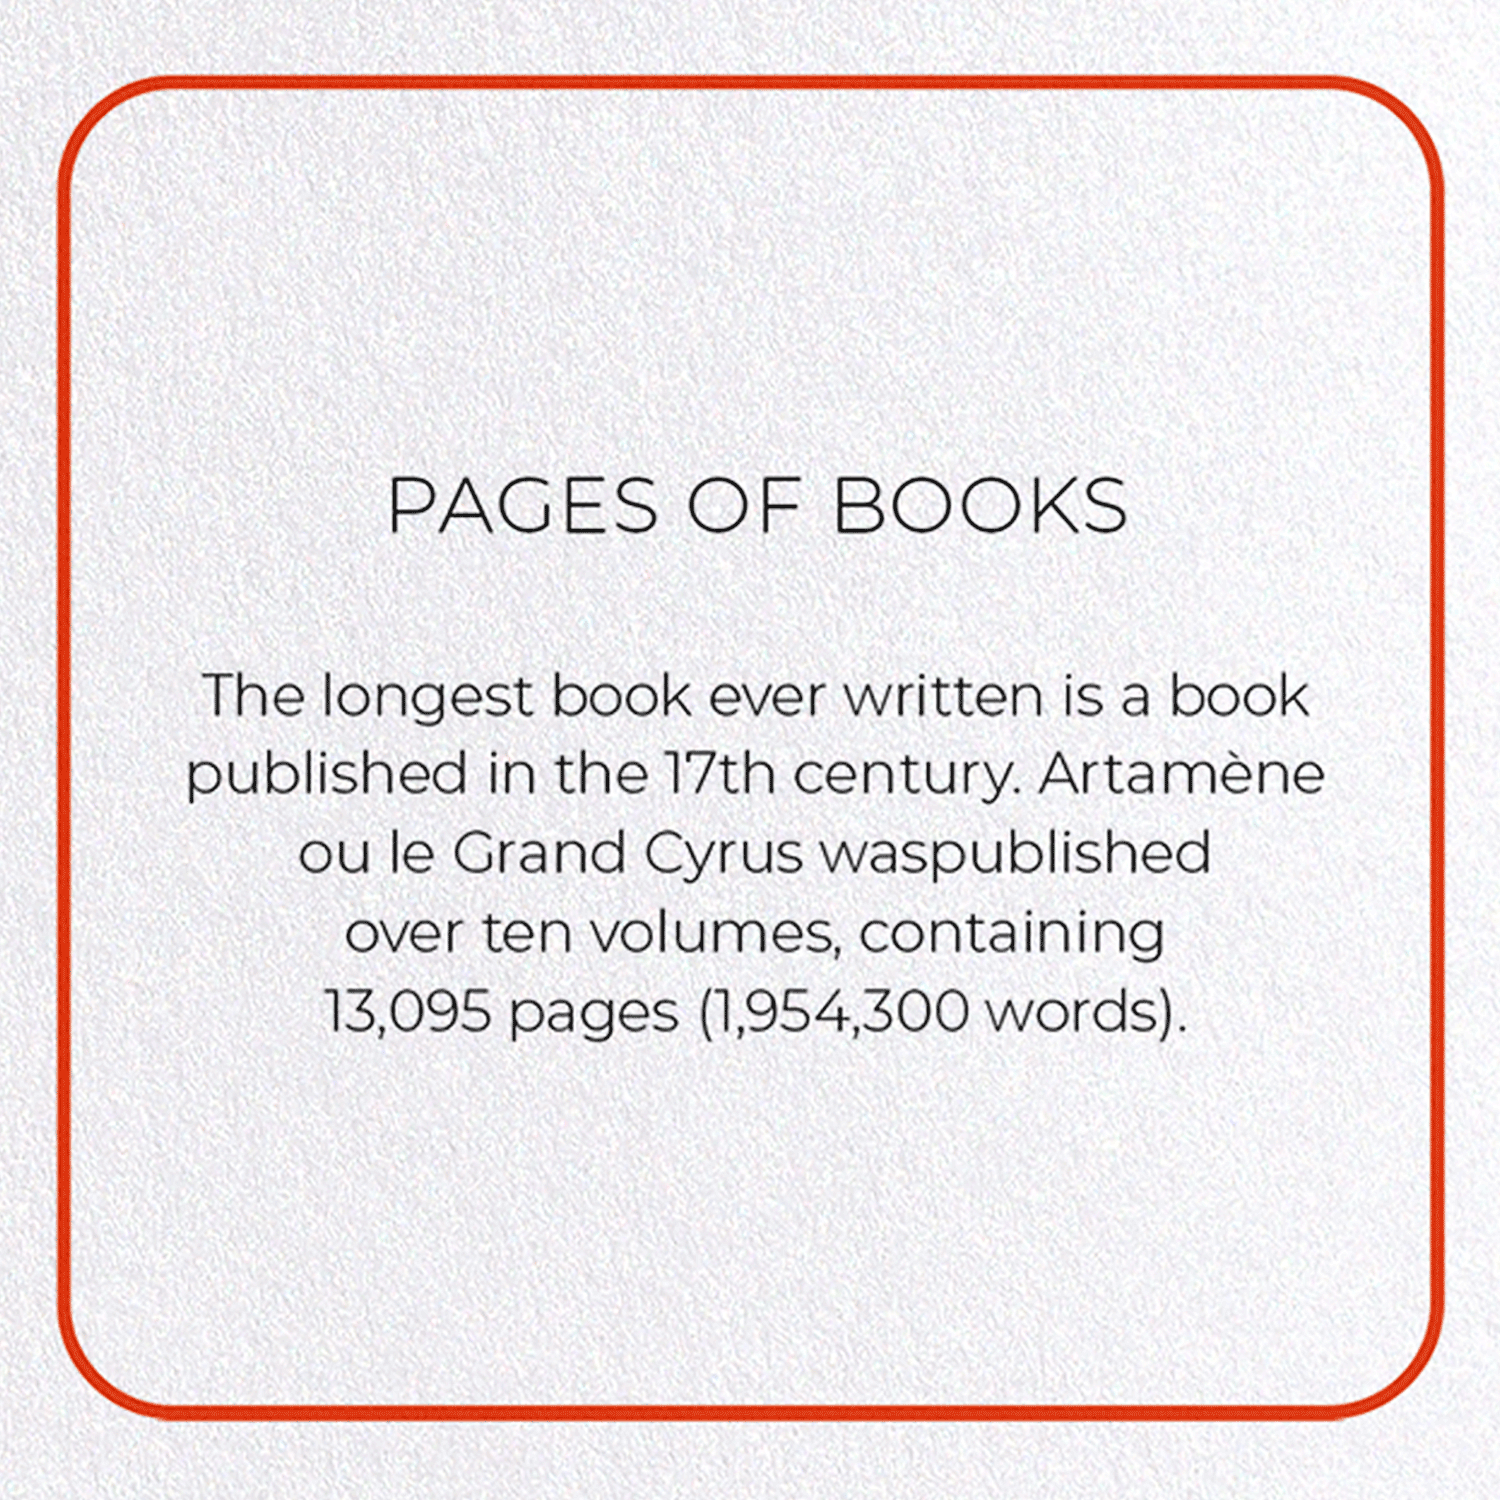 PAGES OF BOOKS